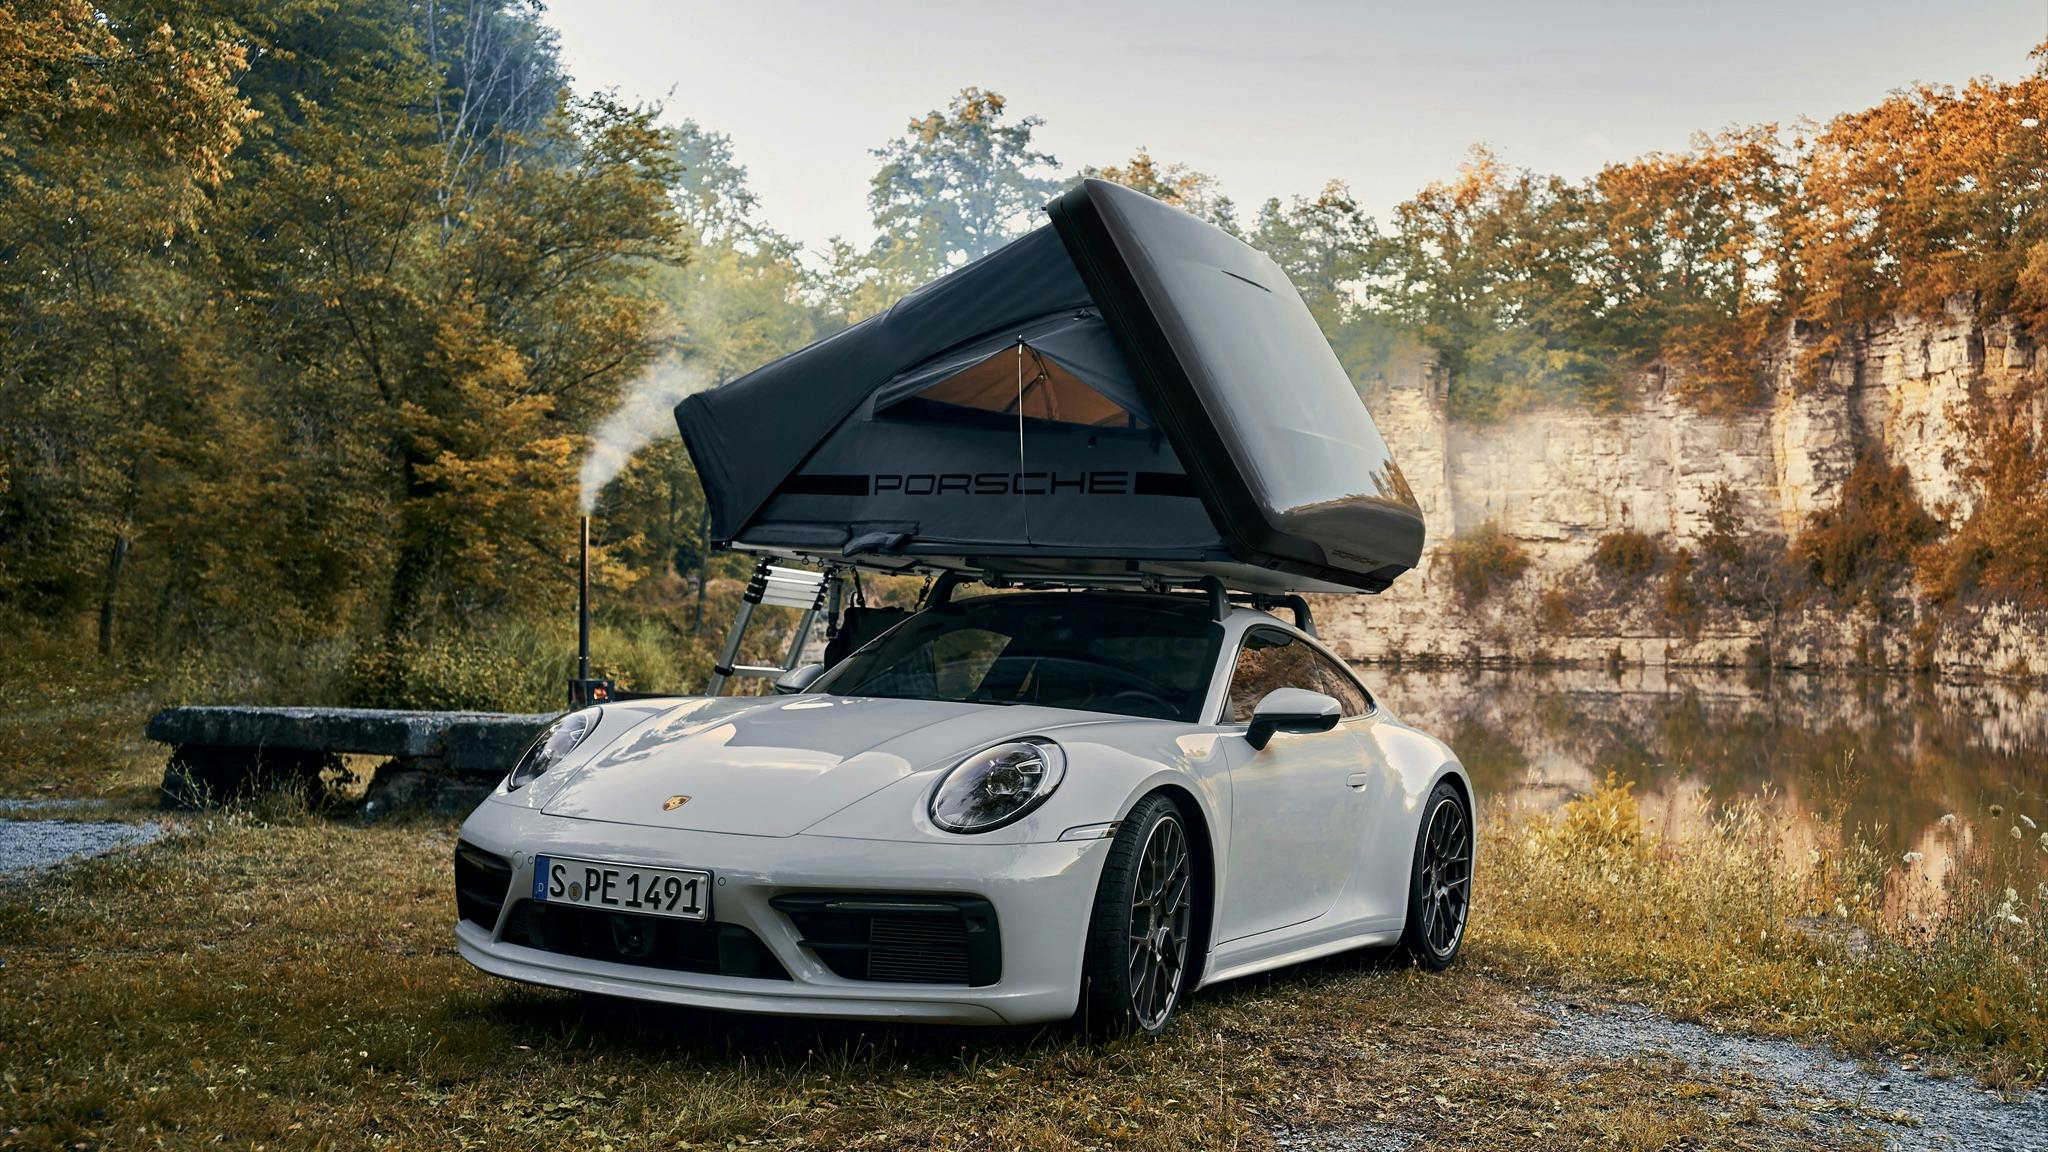 Porsche rooftop tent 911 with tent pitched along riverside